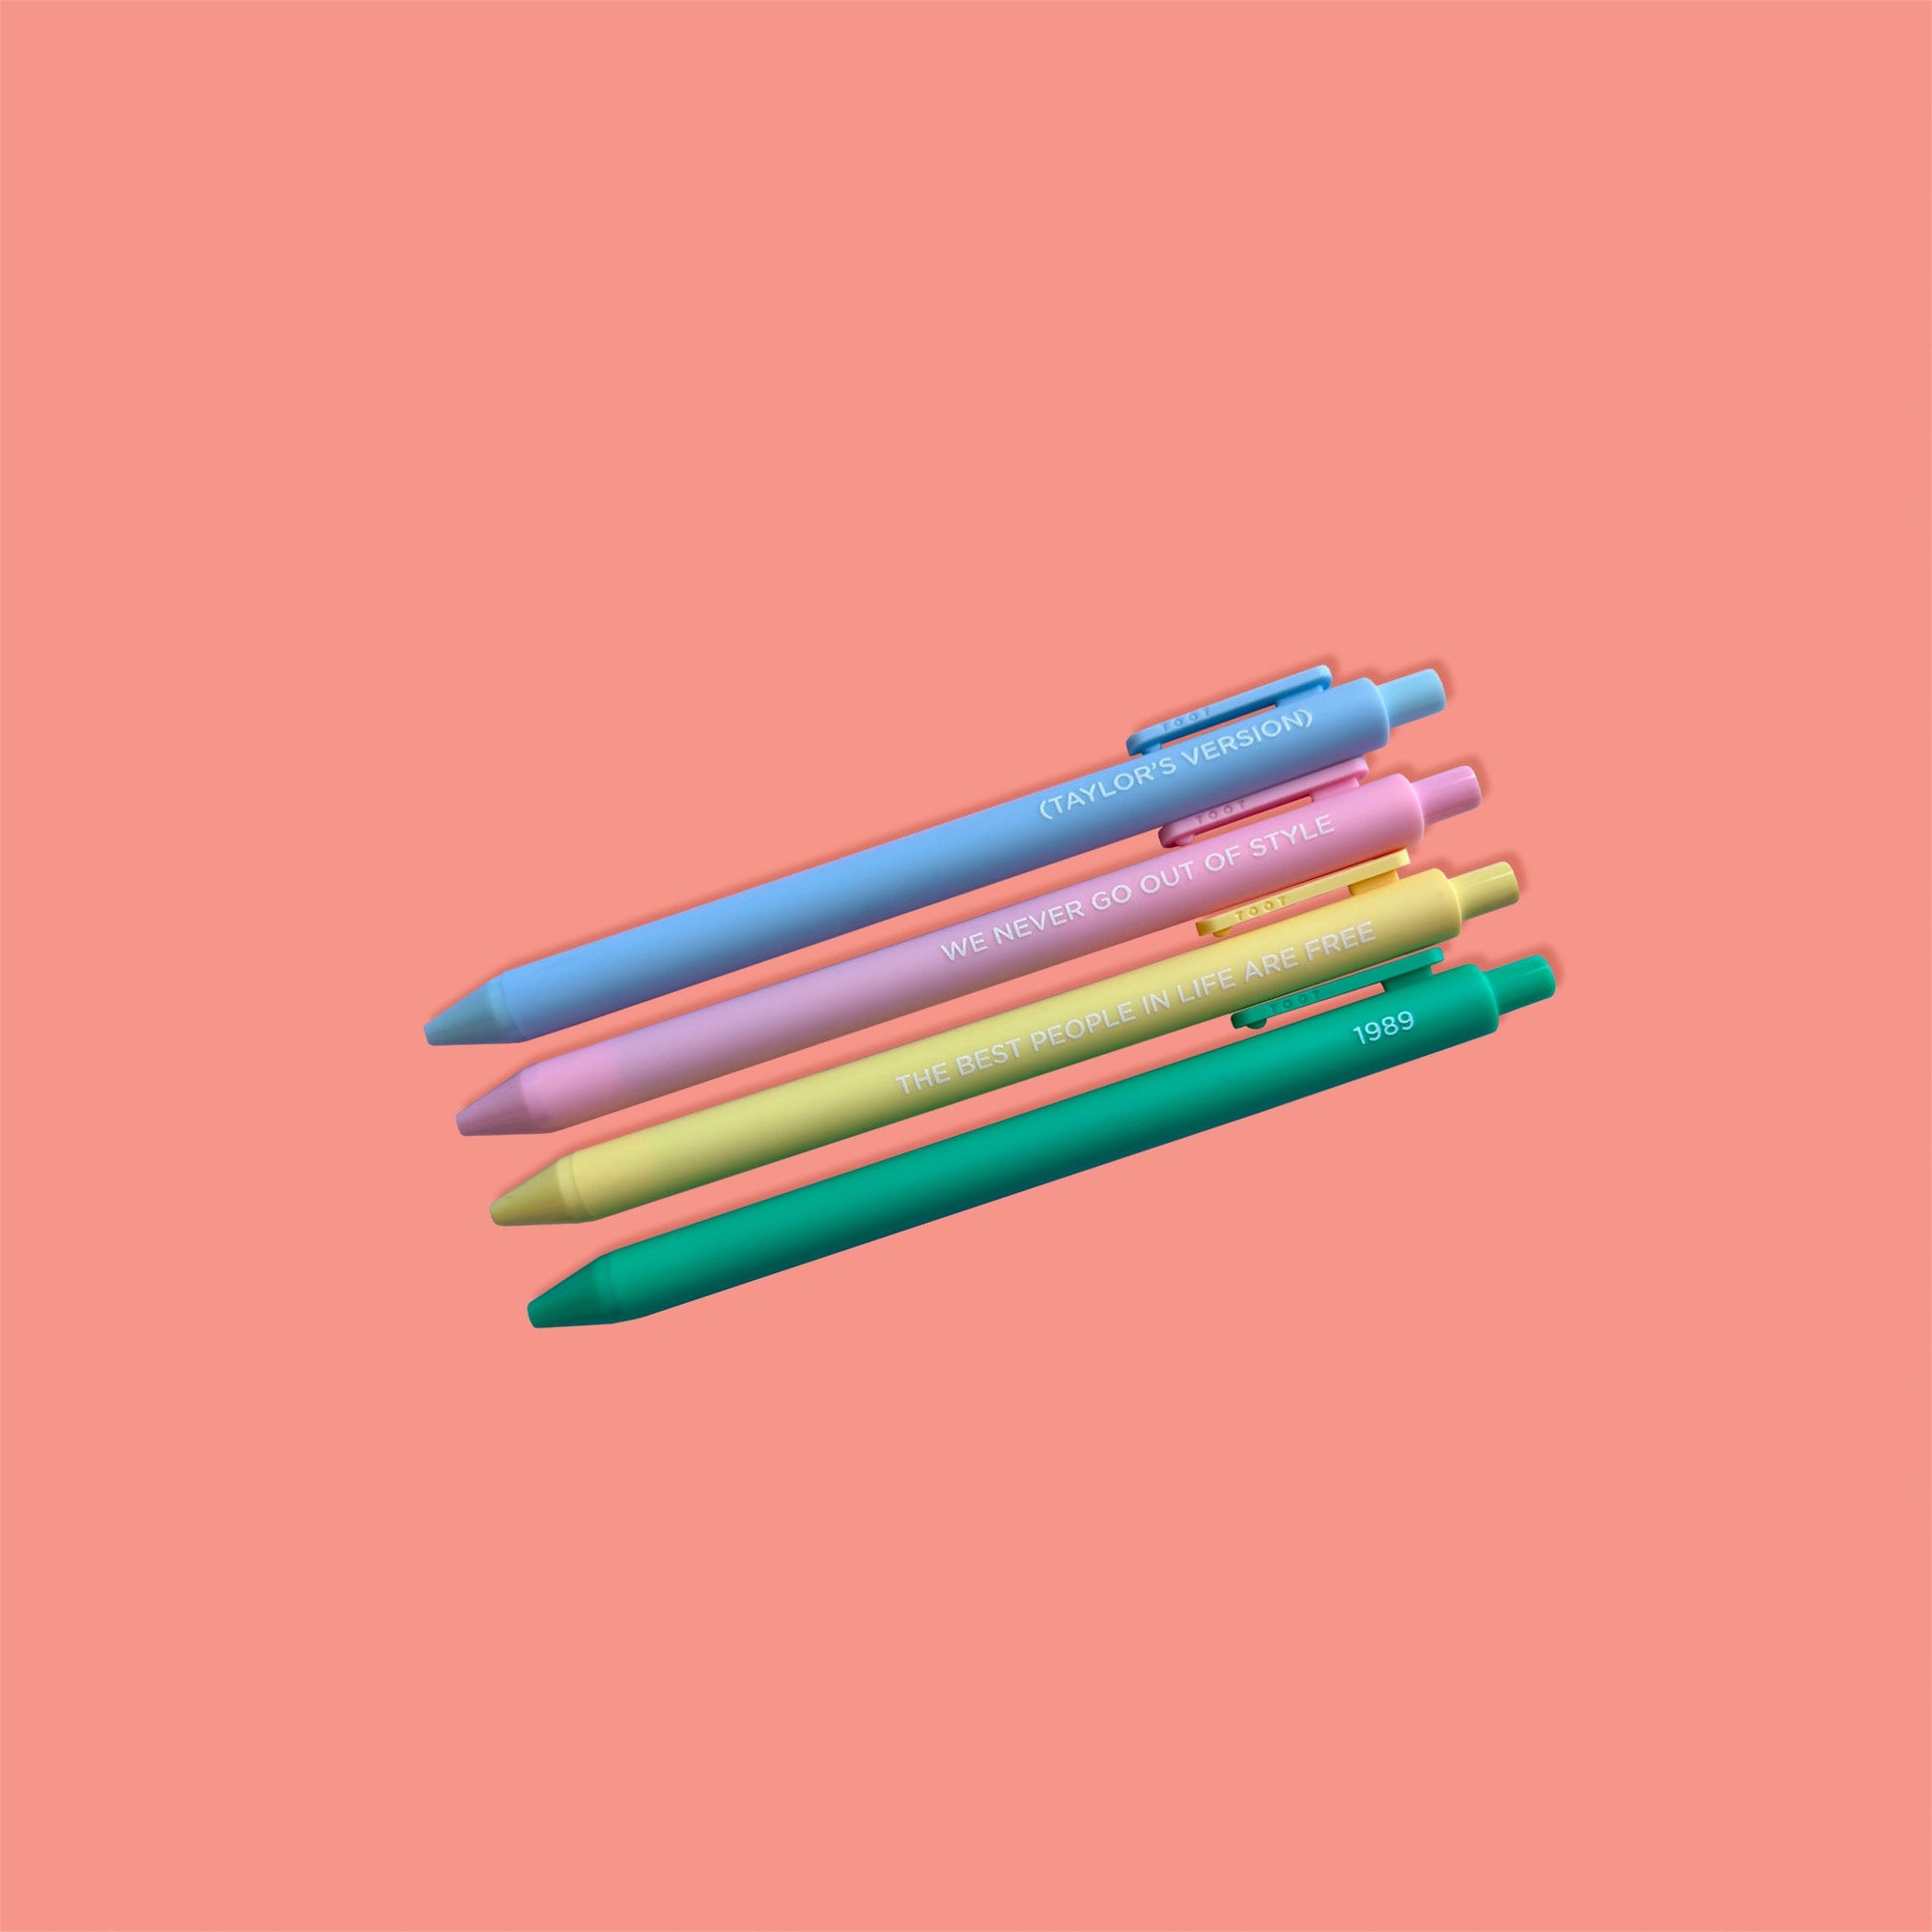 On a coral pink background sits a set of 4 pens. These Taylor Swift inspired pens are in pastel colors of blue, pink, yellow, and green. They say "(TAYLOR'S VERSION)", "WE NEVER GO OUT OF STYLE", "THE BEST PEOPLE IN LIFE ARE FREE", AND "1989." 